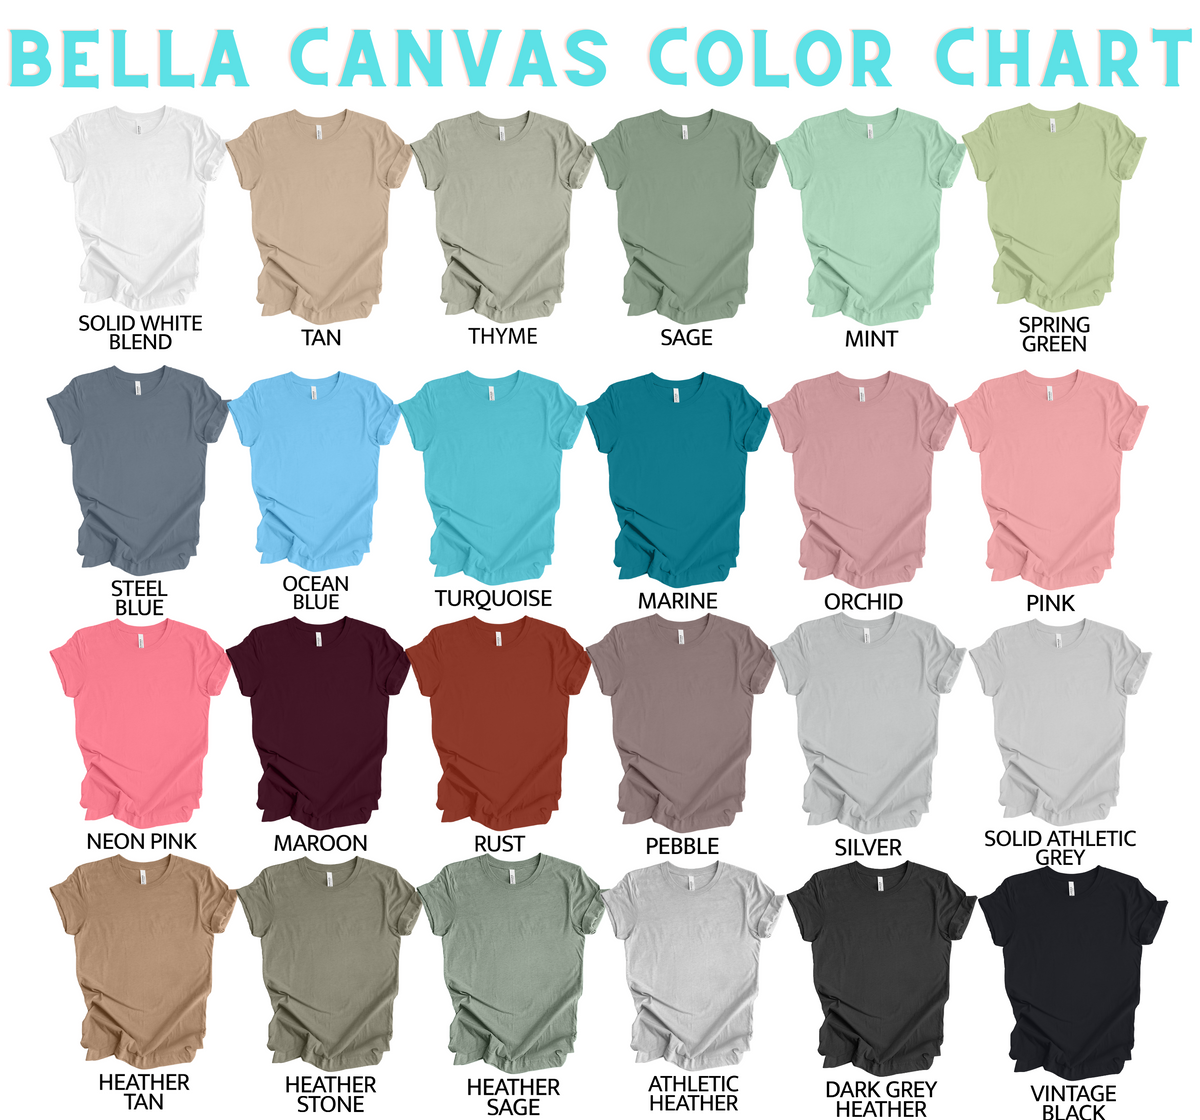 I Got So Much Procrastinating Done Today -Shirt or Sweatshirt *YOU PICK COLOR*